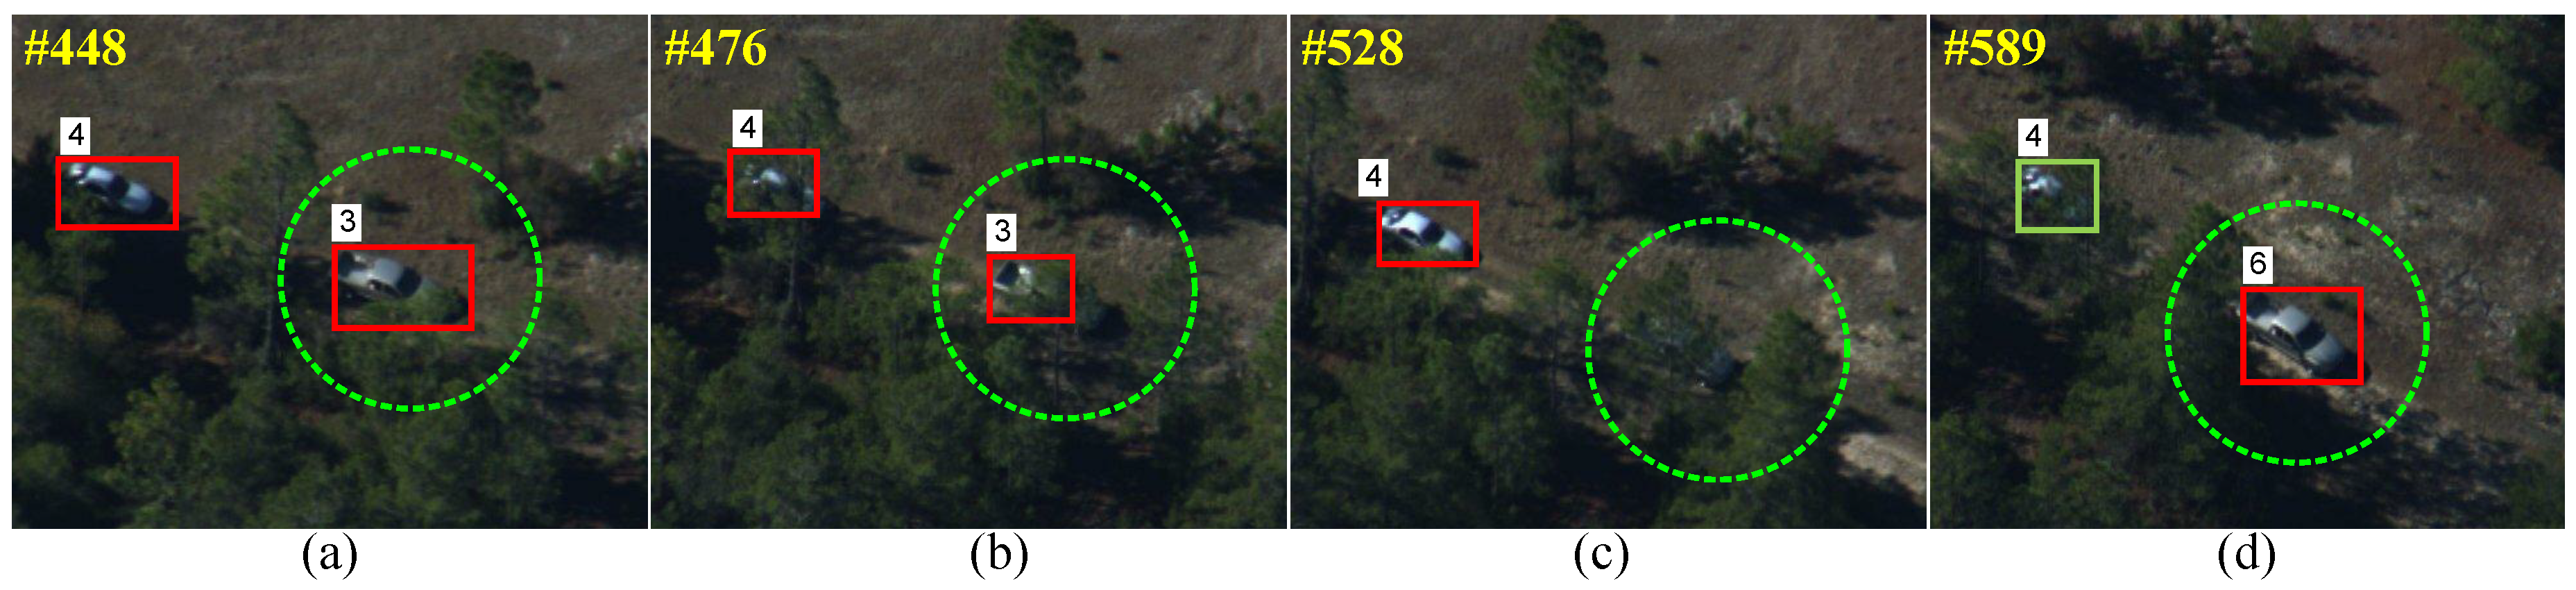 Remote Sensing | Free Full-Text | A Hierarchical Association Framework for  Multi-Object Tracking in Airborne Videos | HTML